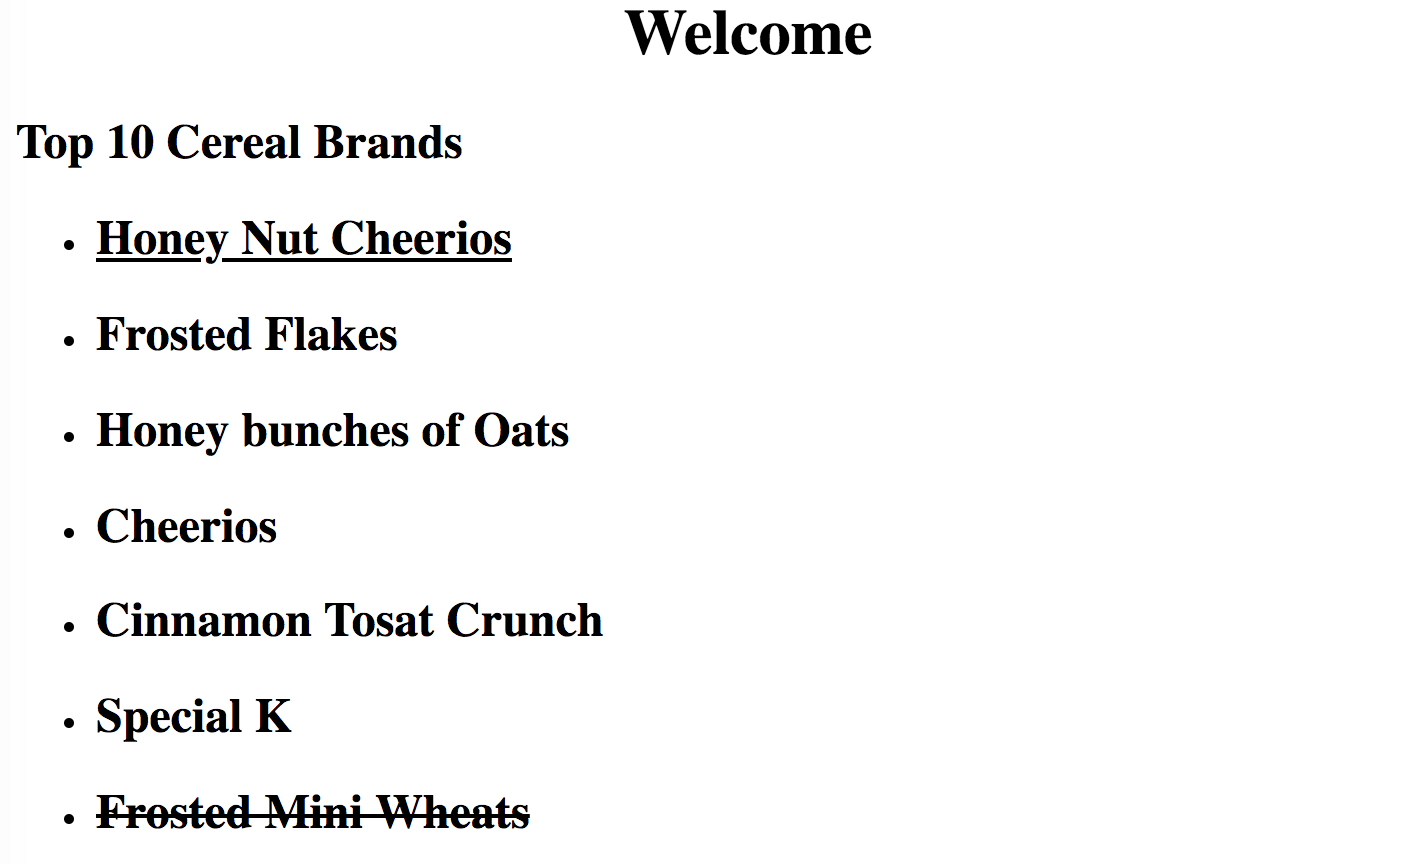 Top 10 Cereal Brands: Honey Nut Cheerios at the top of the list is underlined. Five others are listed. Then Frosted Mini Wheats is struck through at the bottom of the list.